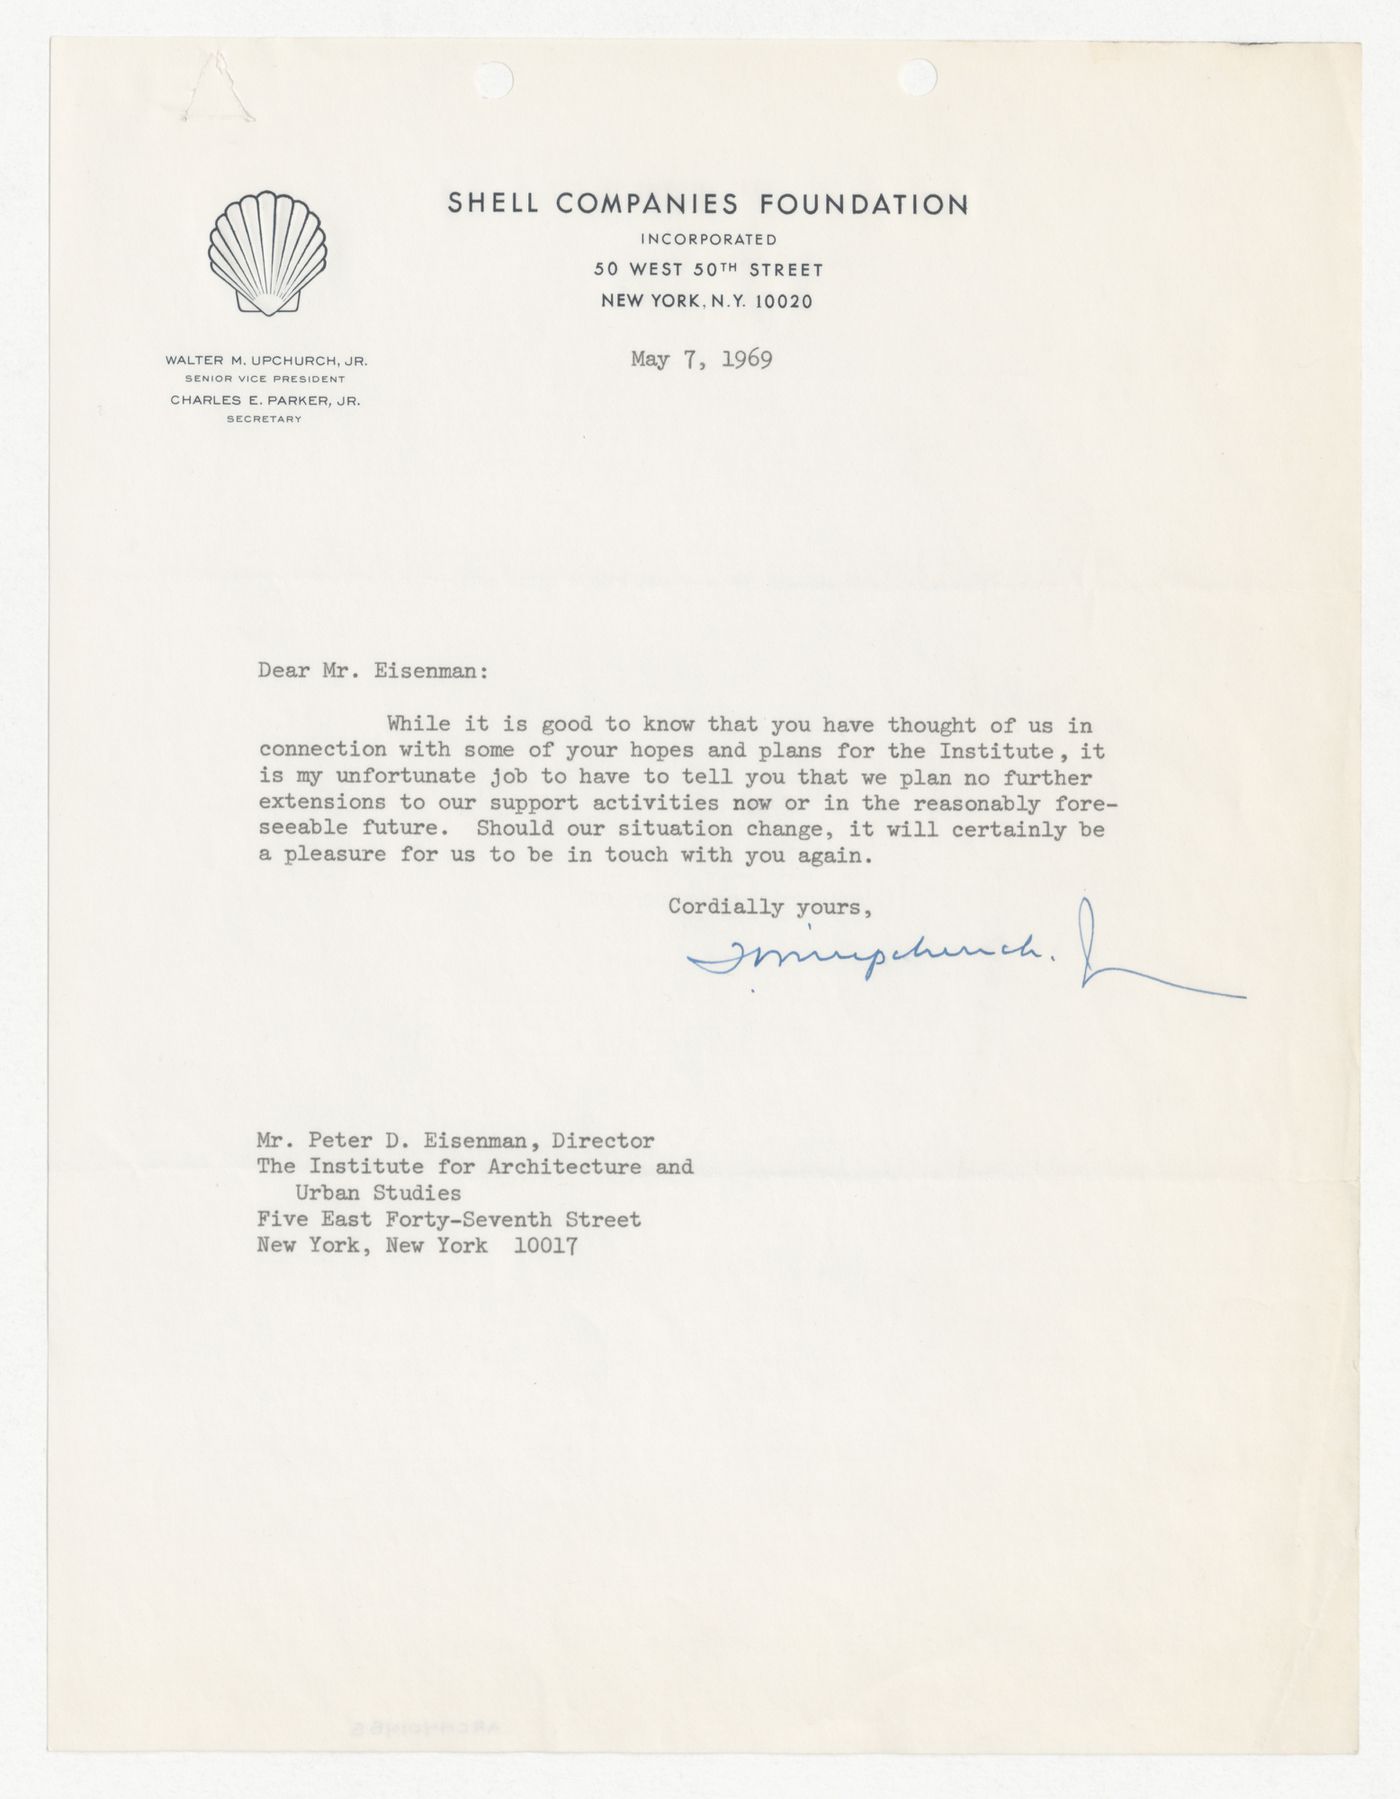 Letter from Walter M. Upchurch Jr. to Peter D. Eisenman responding to donation request made by Eisenman